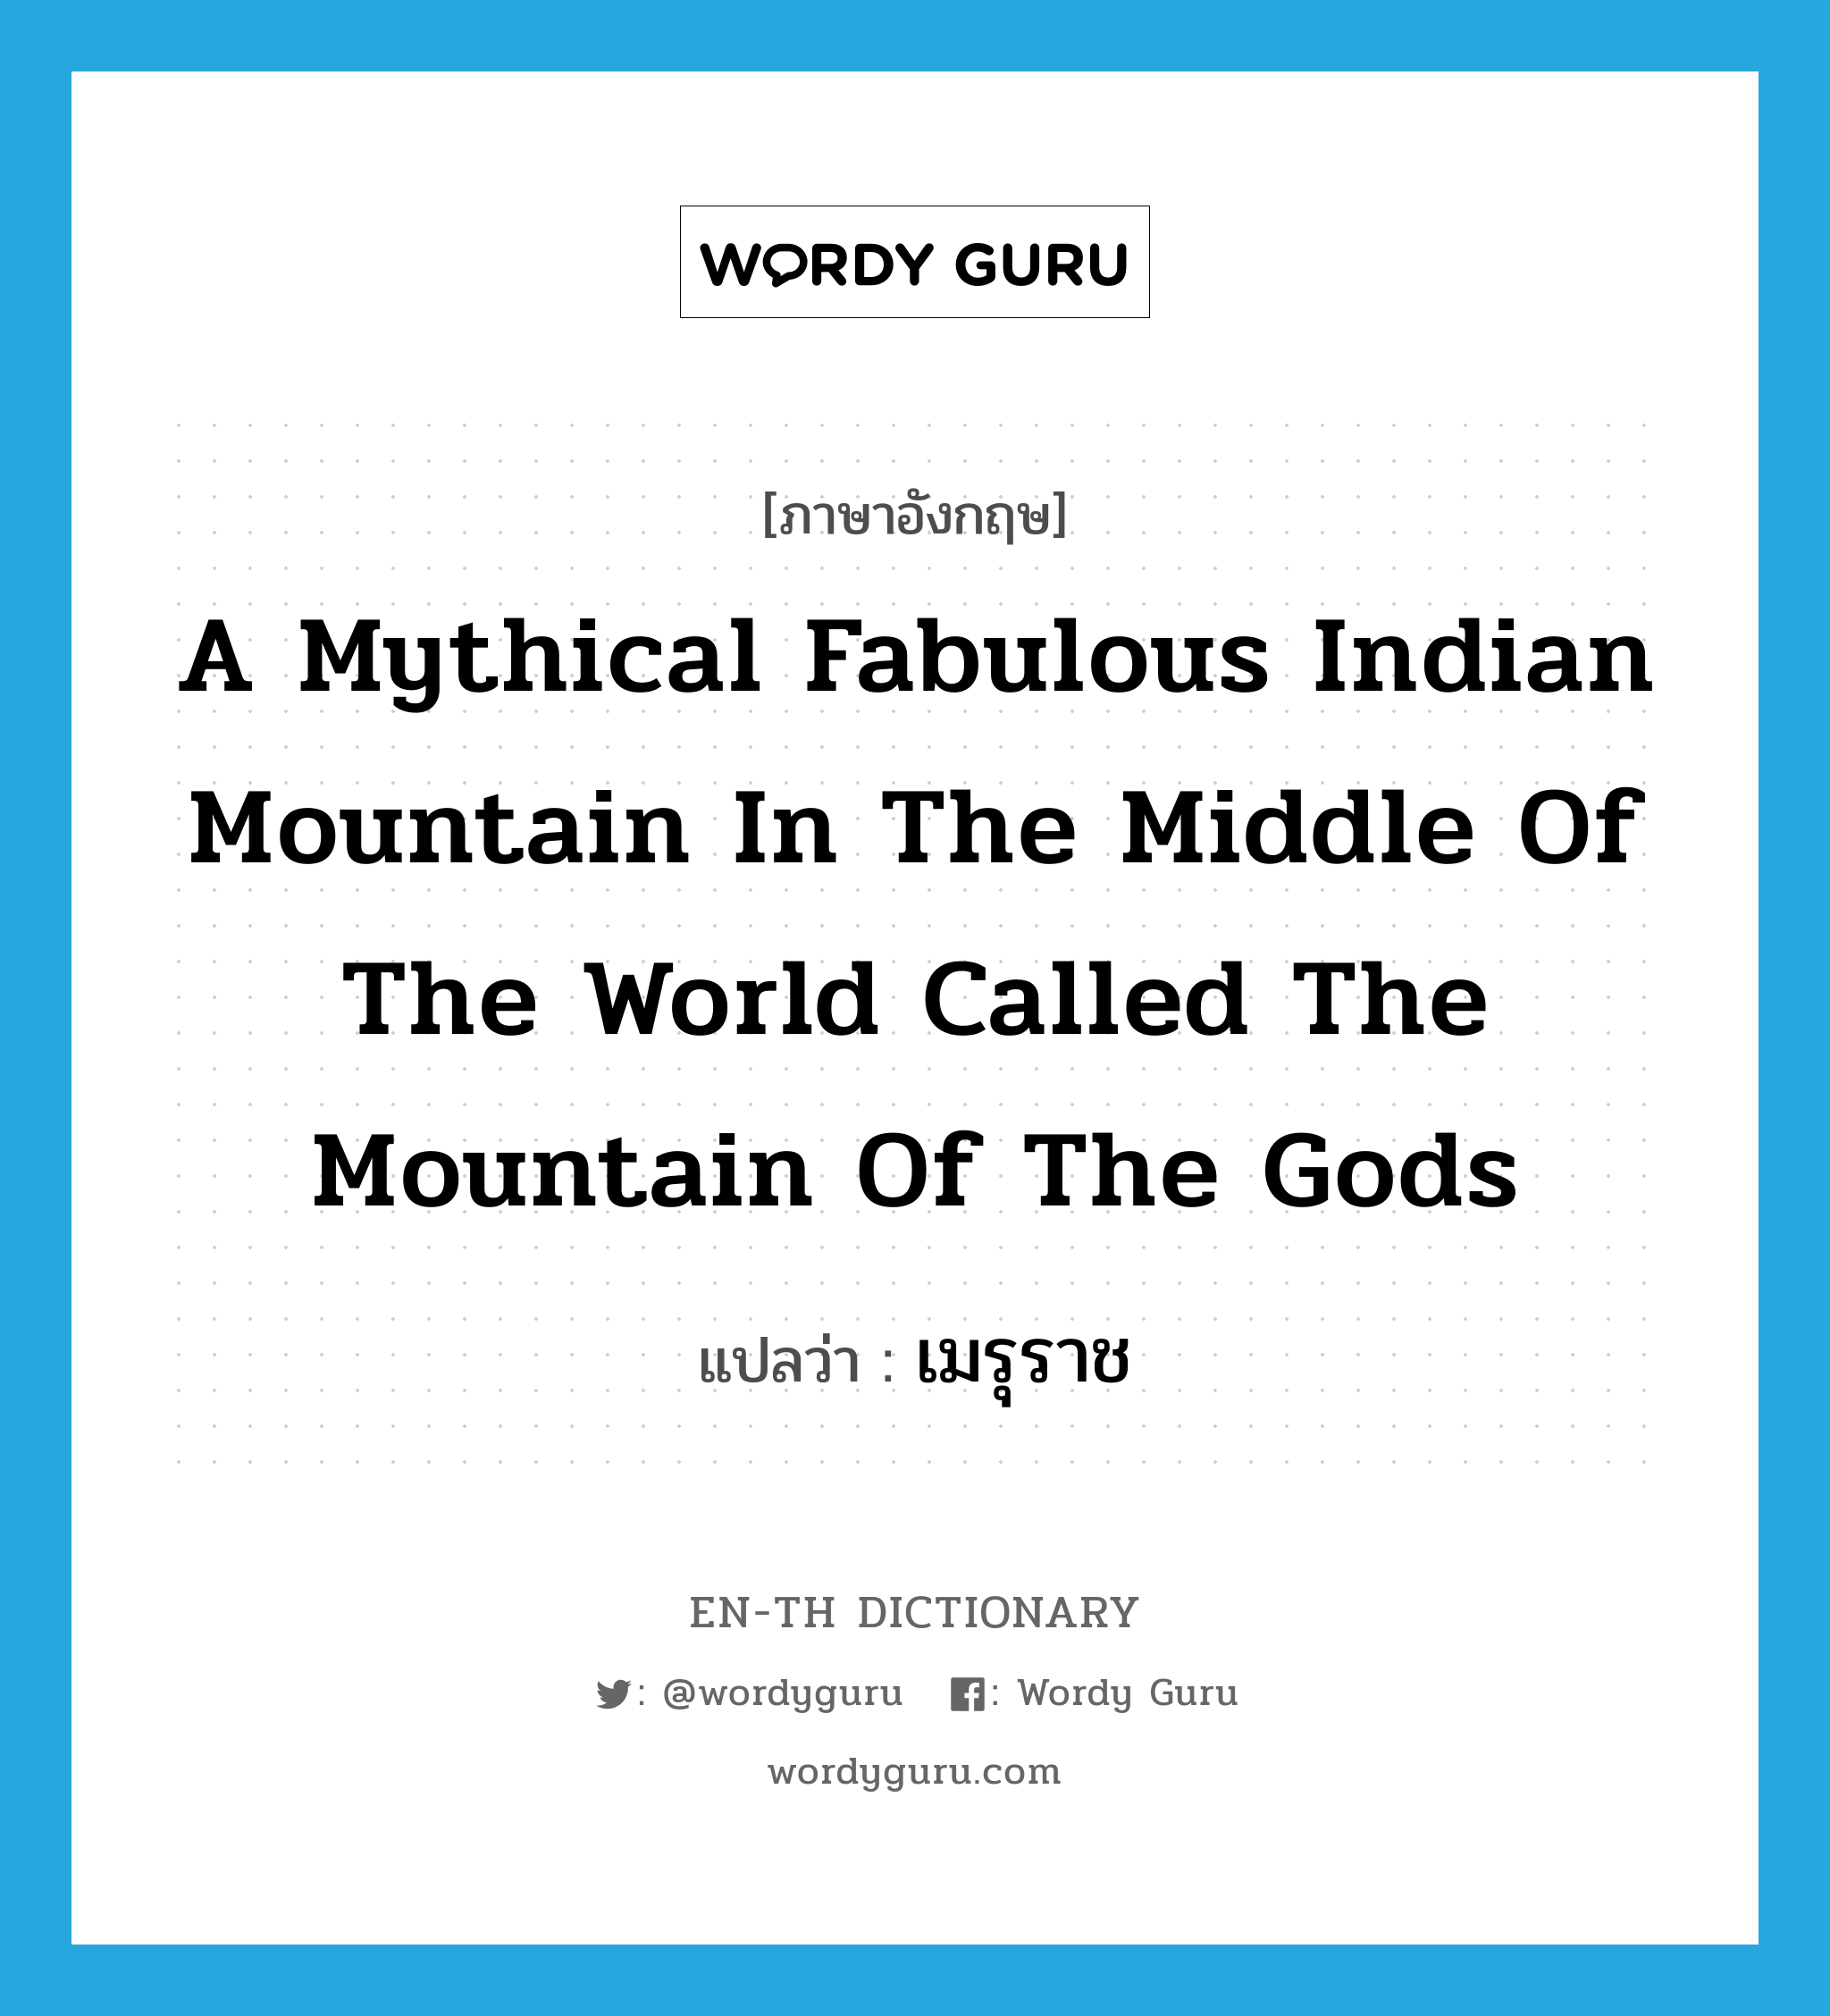 a mythical fabulous Indian mountain in the middle of the world called The Mountain of the Gods แปลว่า? คำศัพท์ในกลุ่มประเภท N, คำศัพท์ภาษาอังกฤษ a mythical fabulous Indian mountain in the middle of the world called The Mountain of the Gods แปลว่า เมรุราช ประเภท N หมวด N